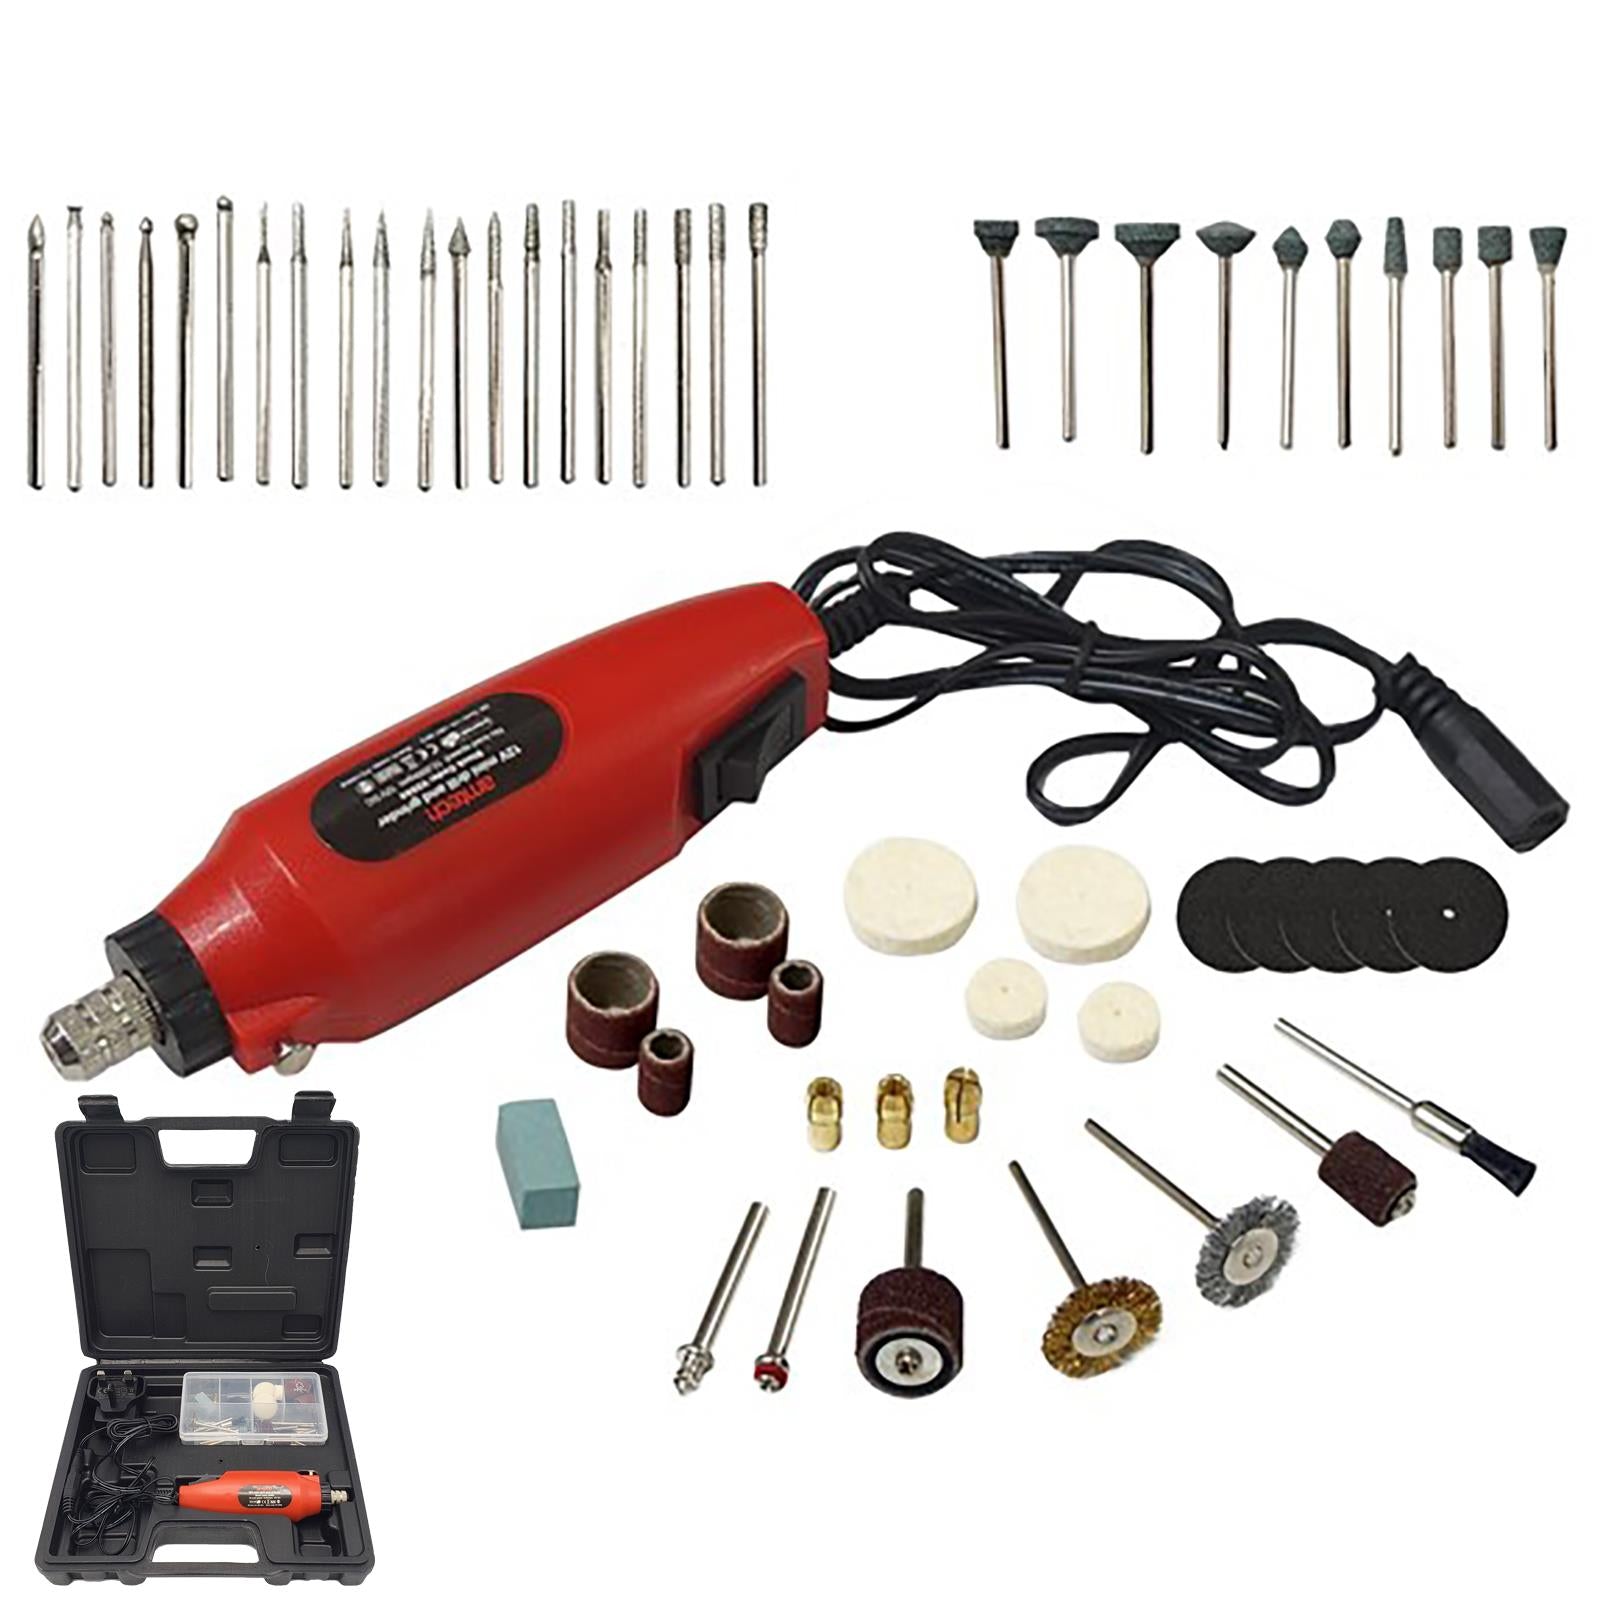 Amtech Mini Drill and Grinder Kit in Case 60 Piece